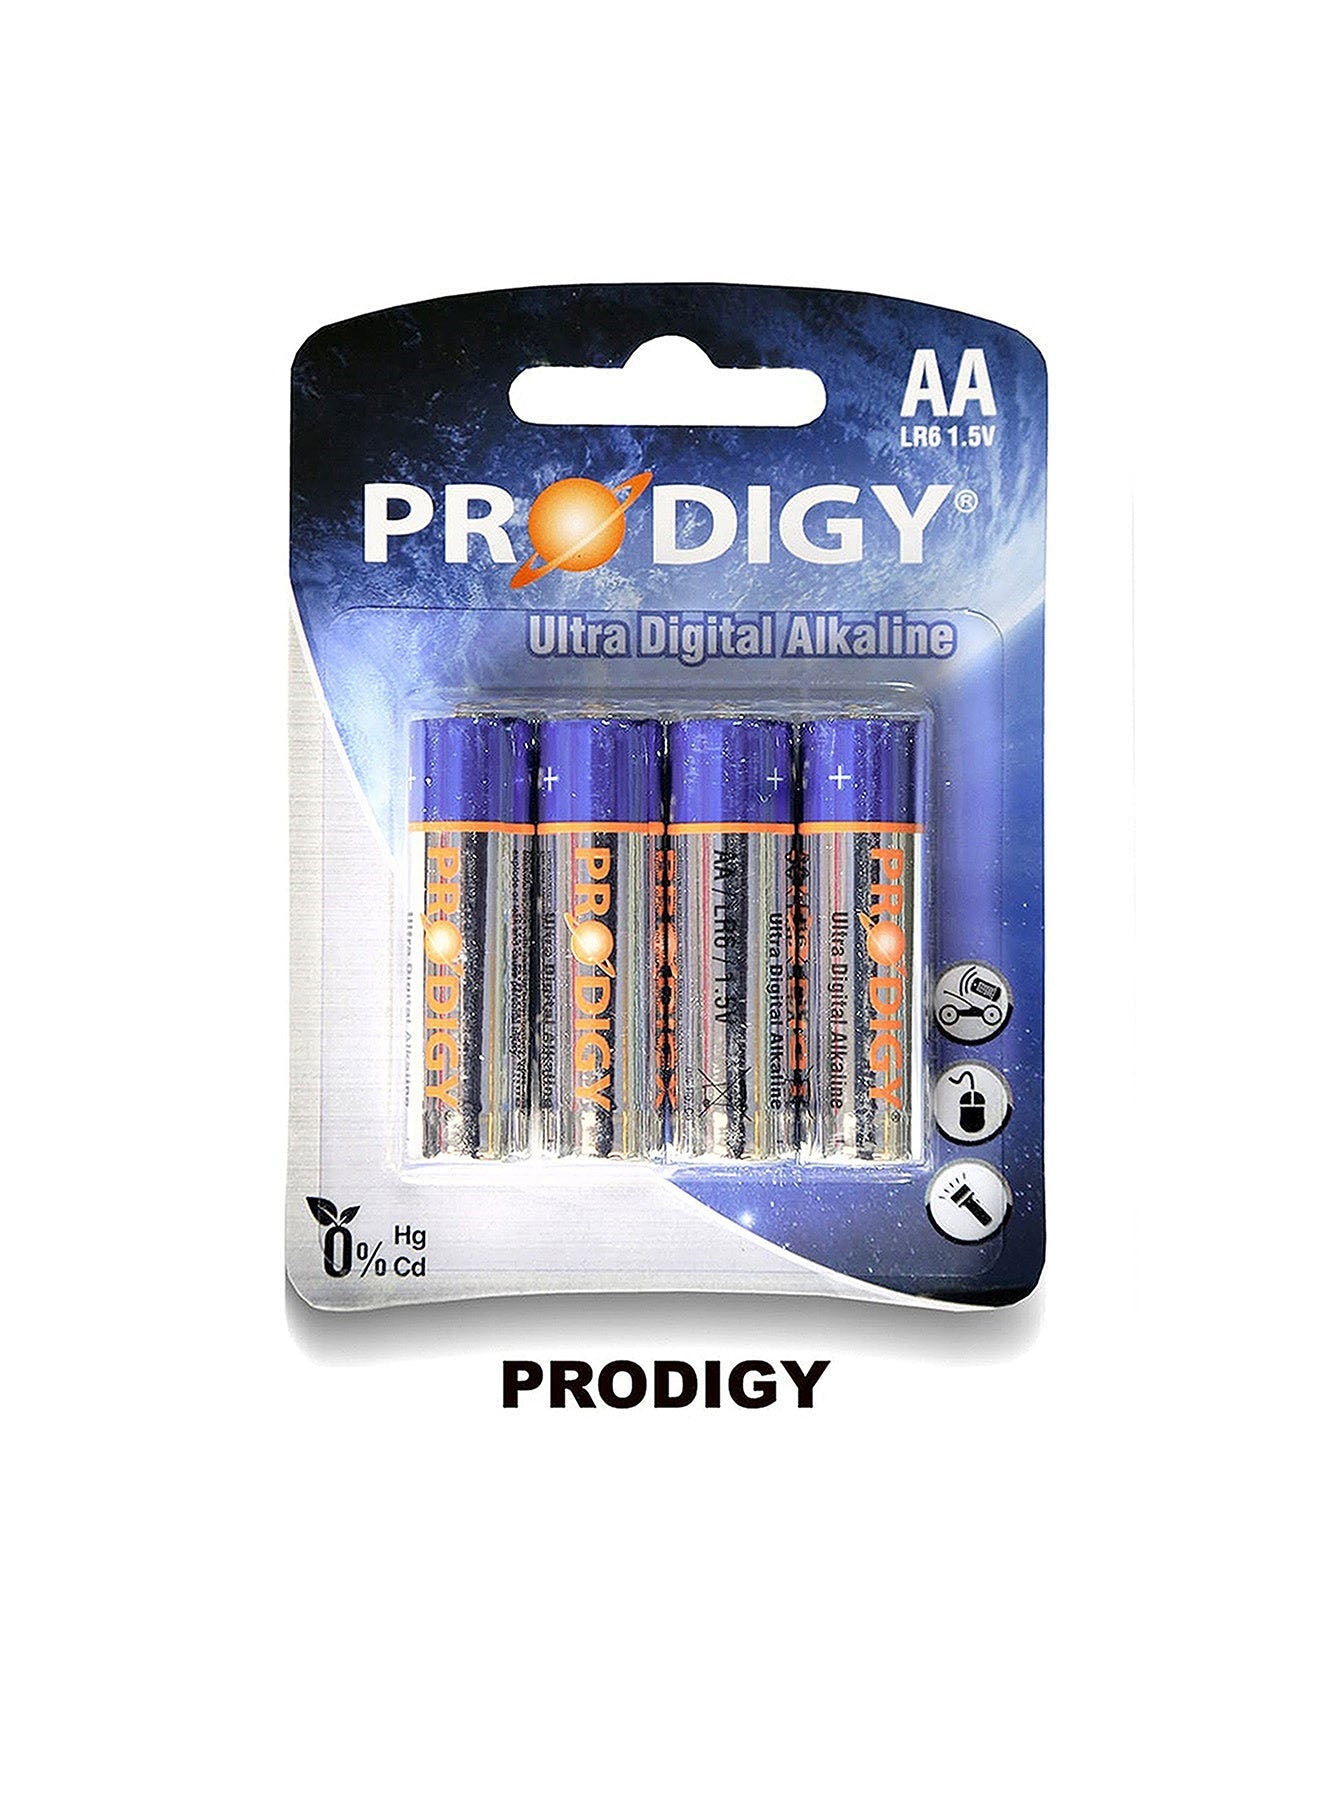 Prodigy Alkaline LR6UD AA4 Value Pack of 4 